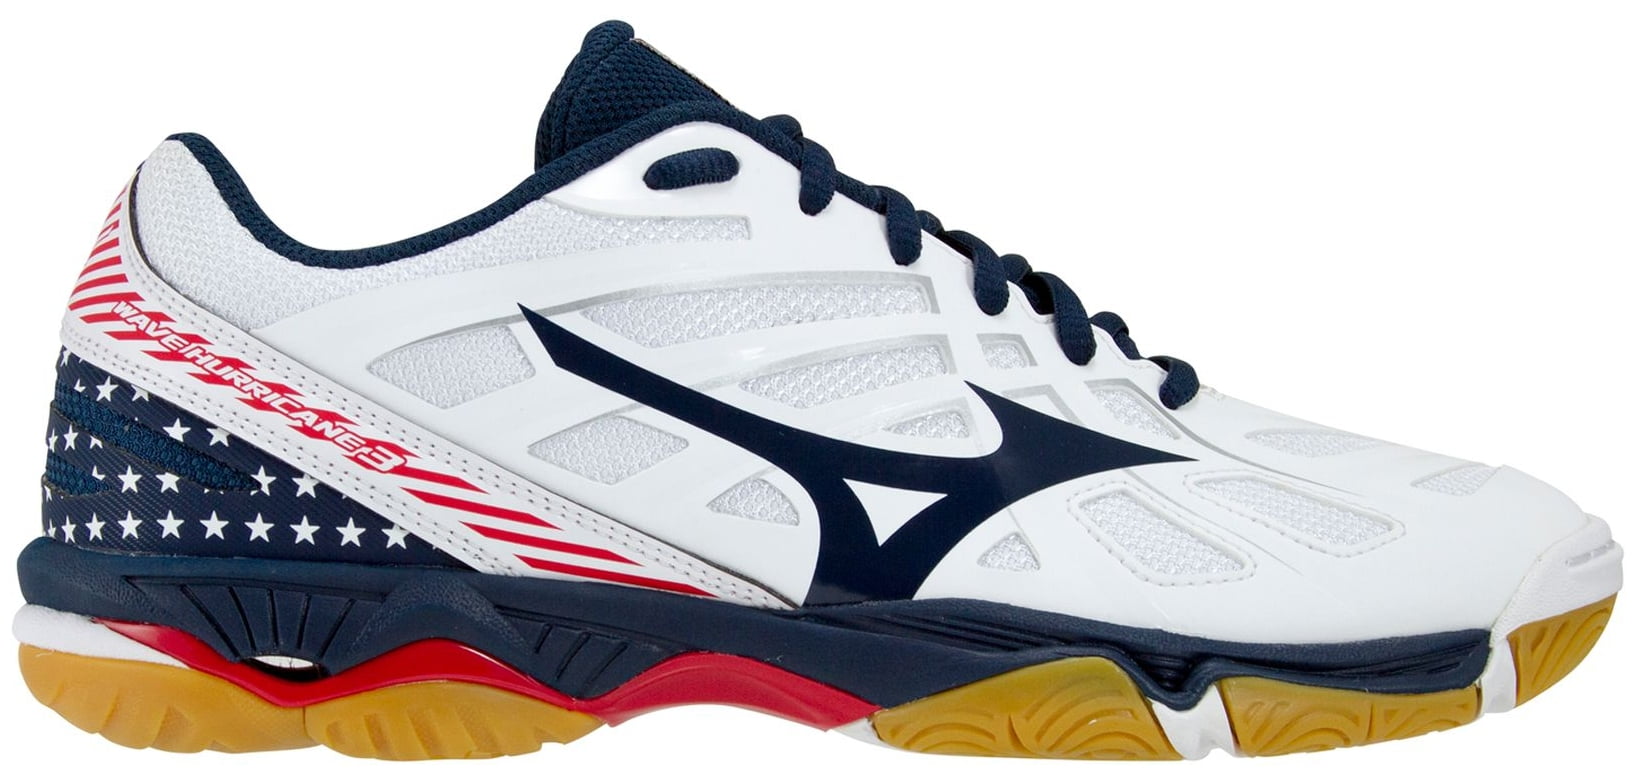 mizuno volleyball shoes red